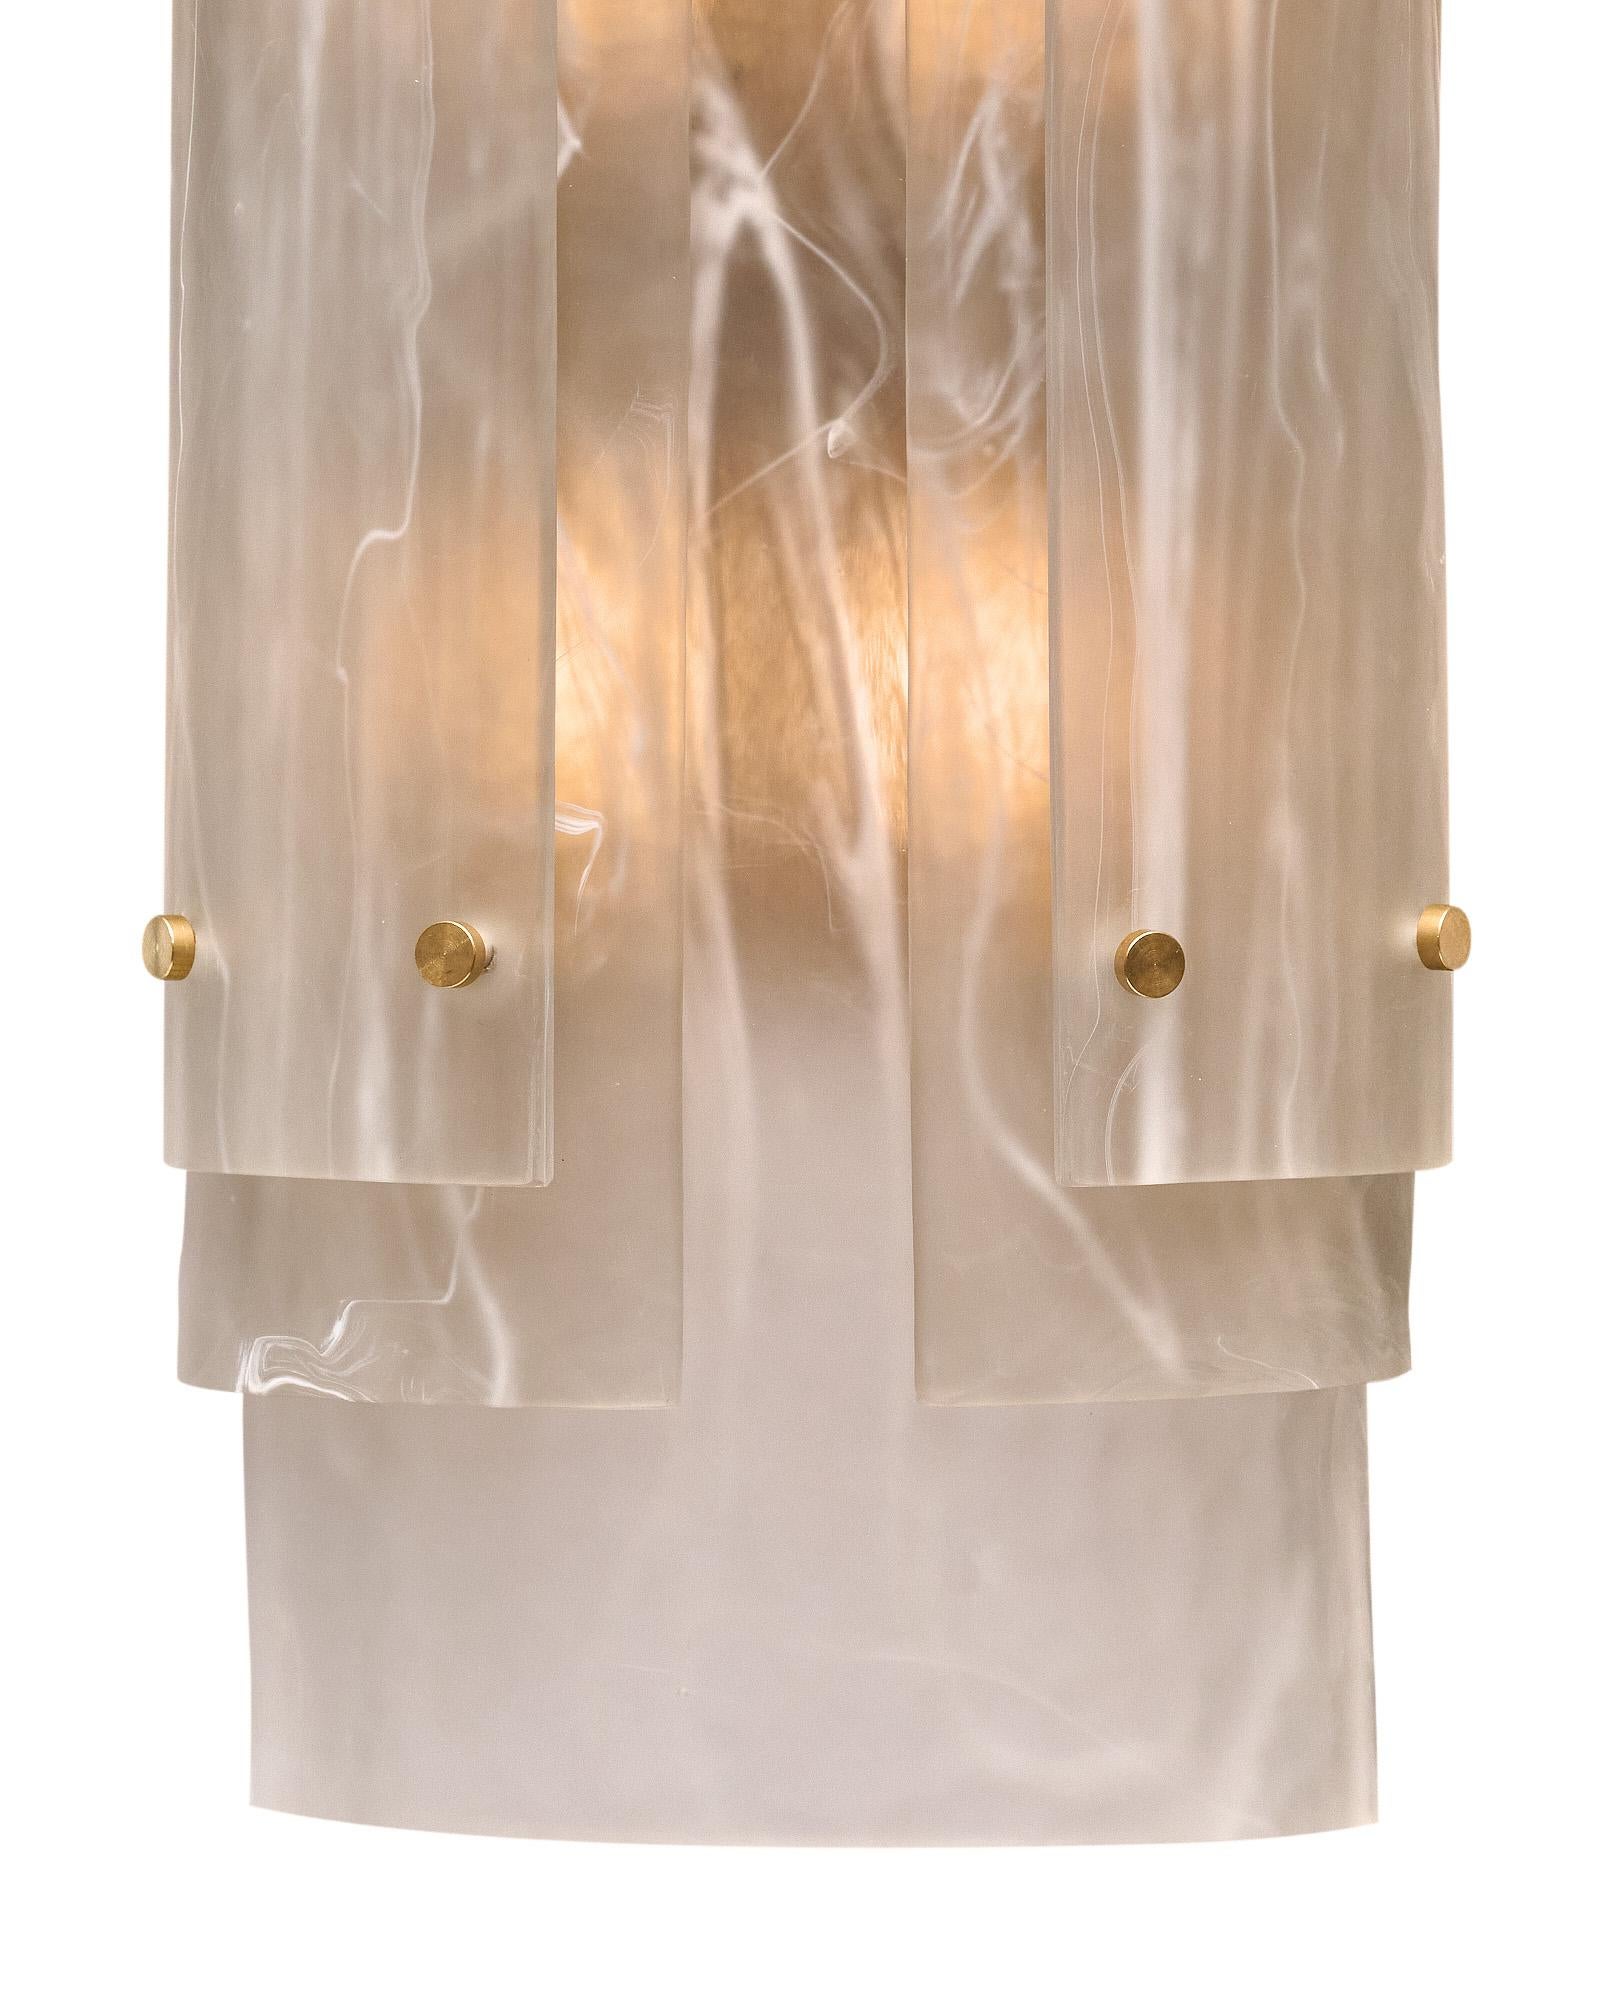 Pair of sconces hand-crafted by artisan glass blowers in Murano, Italy. This sconce is made with layers of hand-blown glass made using a technique to give them an alabaster pattern. The layers of glass are held in place on a brass structure. They